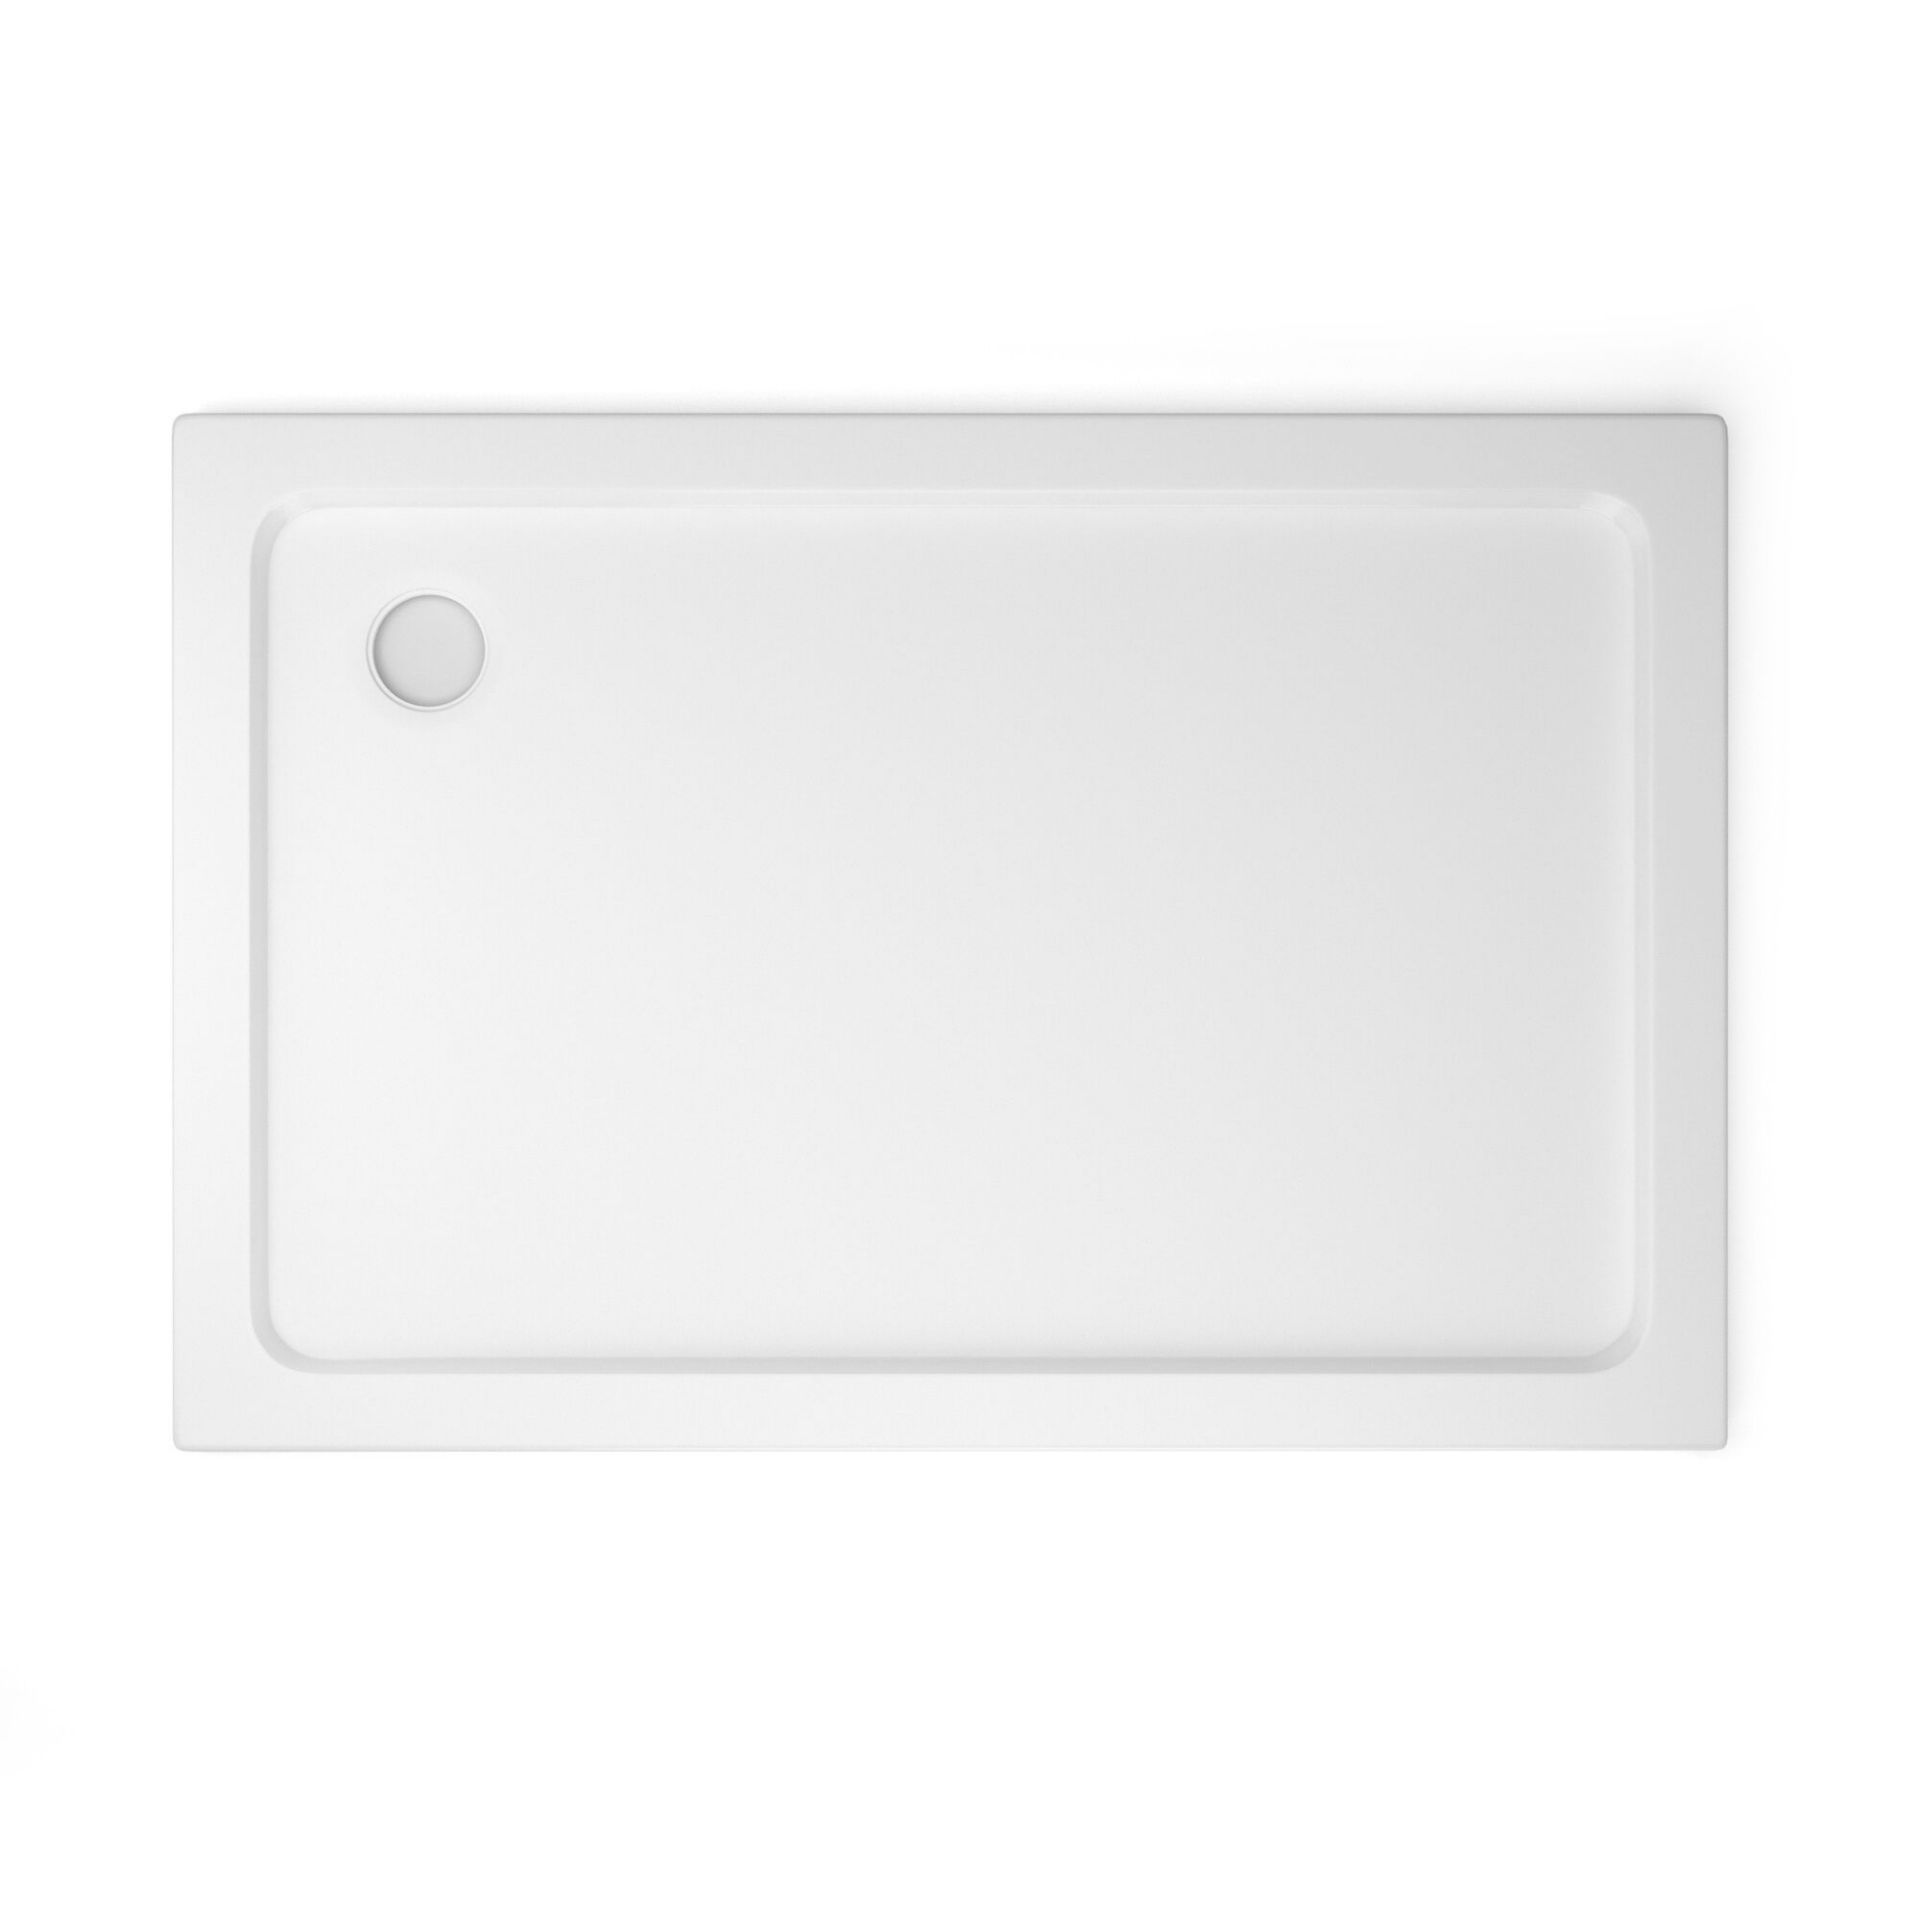 (LP52) 1200x800mm Rectangular Ultra Slim Shower Tray. Constructed from acrylic capped stone resin